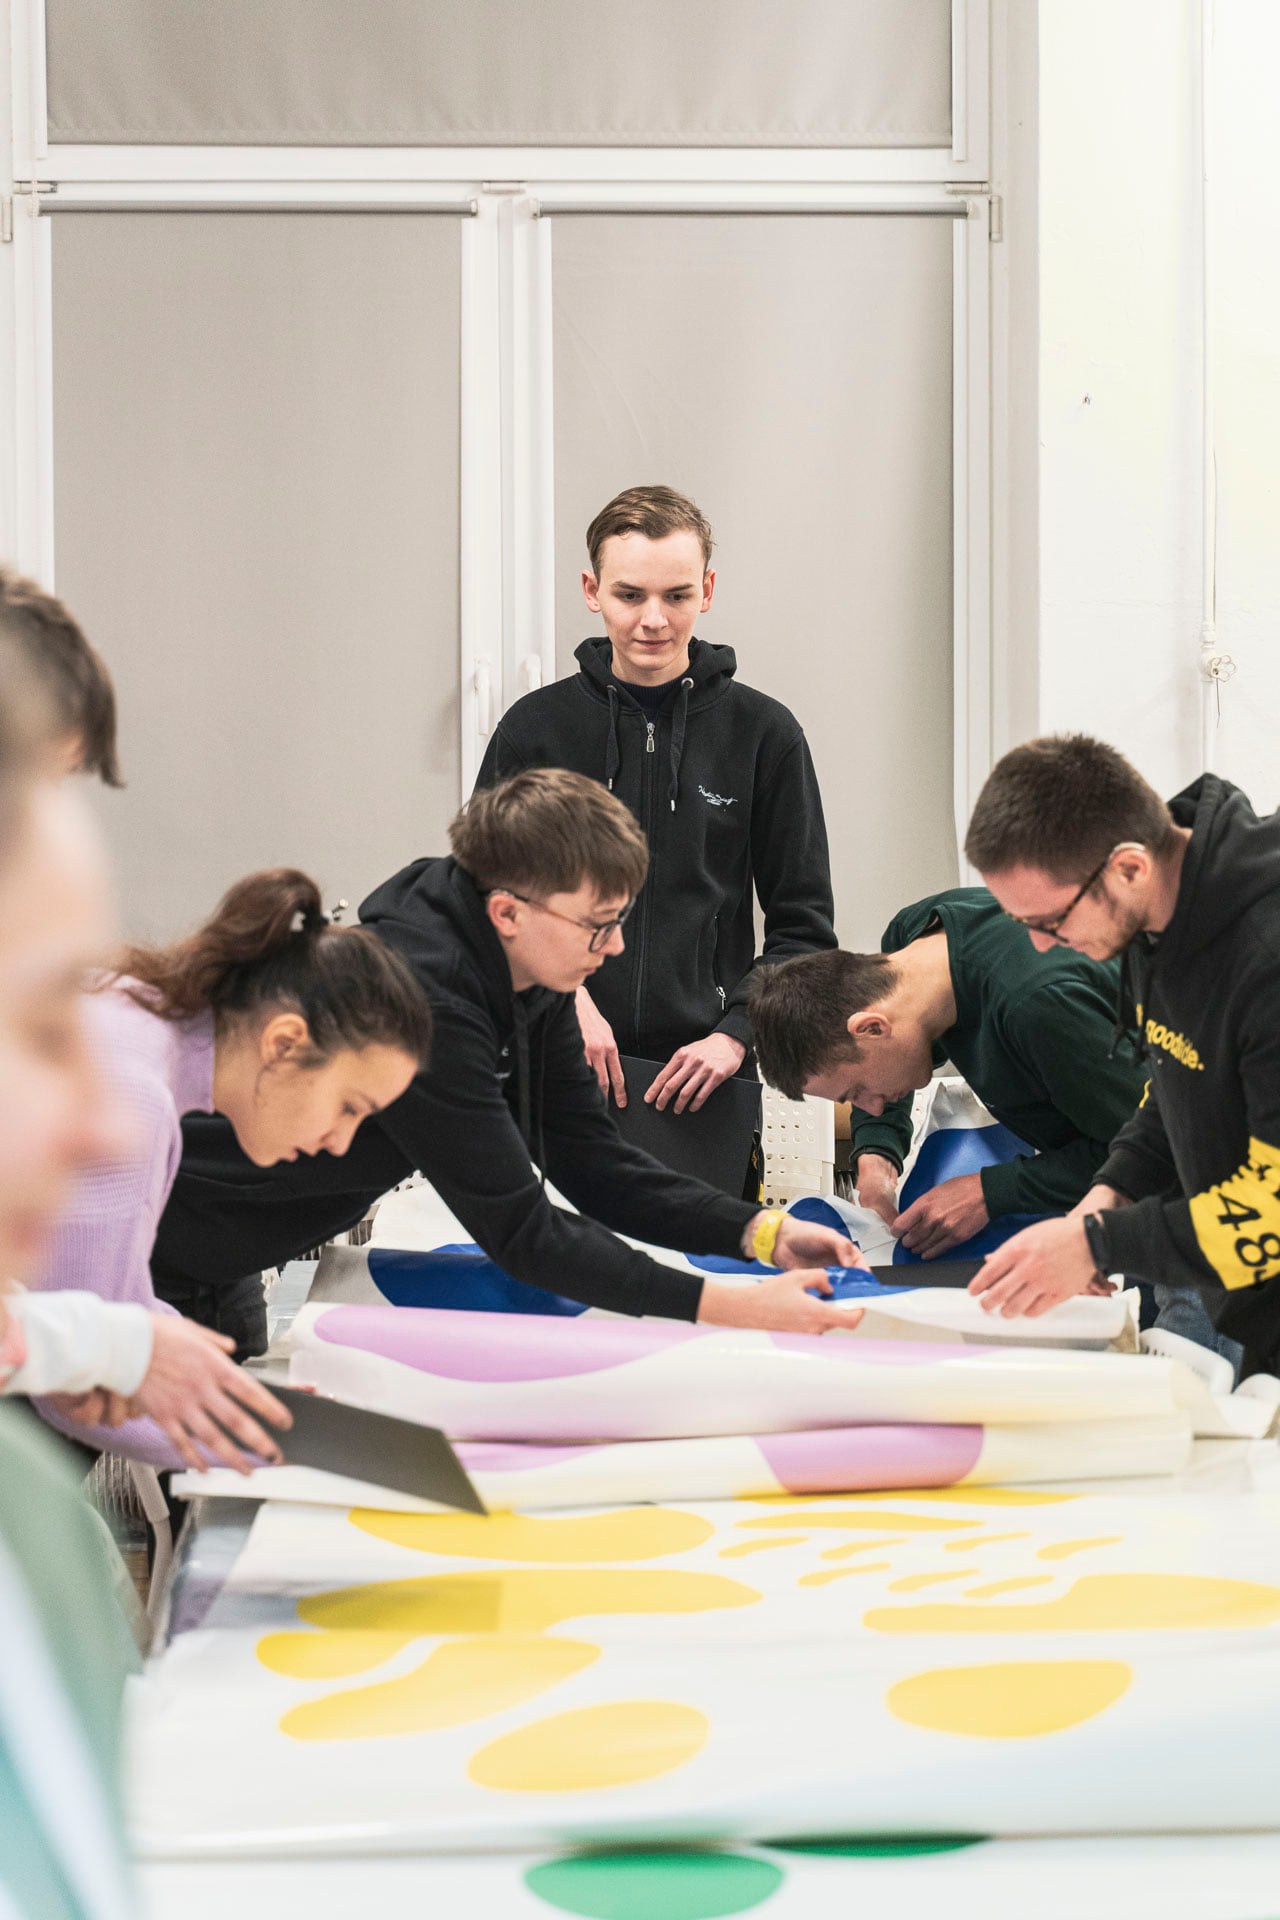 Workshops for the d/Deaf youth inspired by the “Accessible Collection” exhibition, conducted by Wioletta Stępniak and Agata Sztorc-Gromaszek, interpretation: Ewelina Lachowska